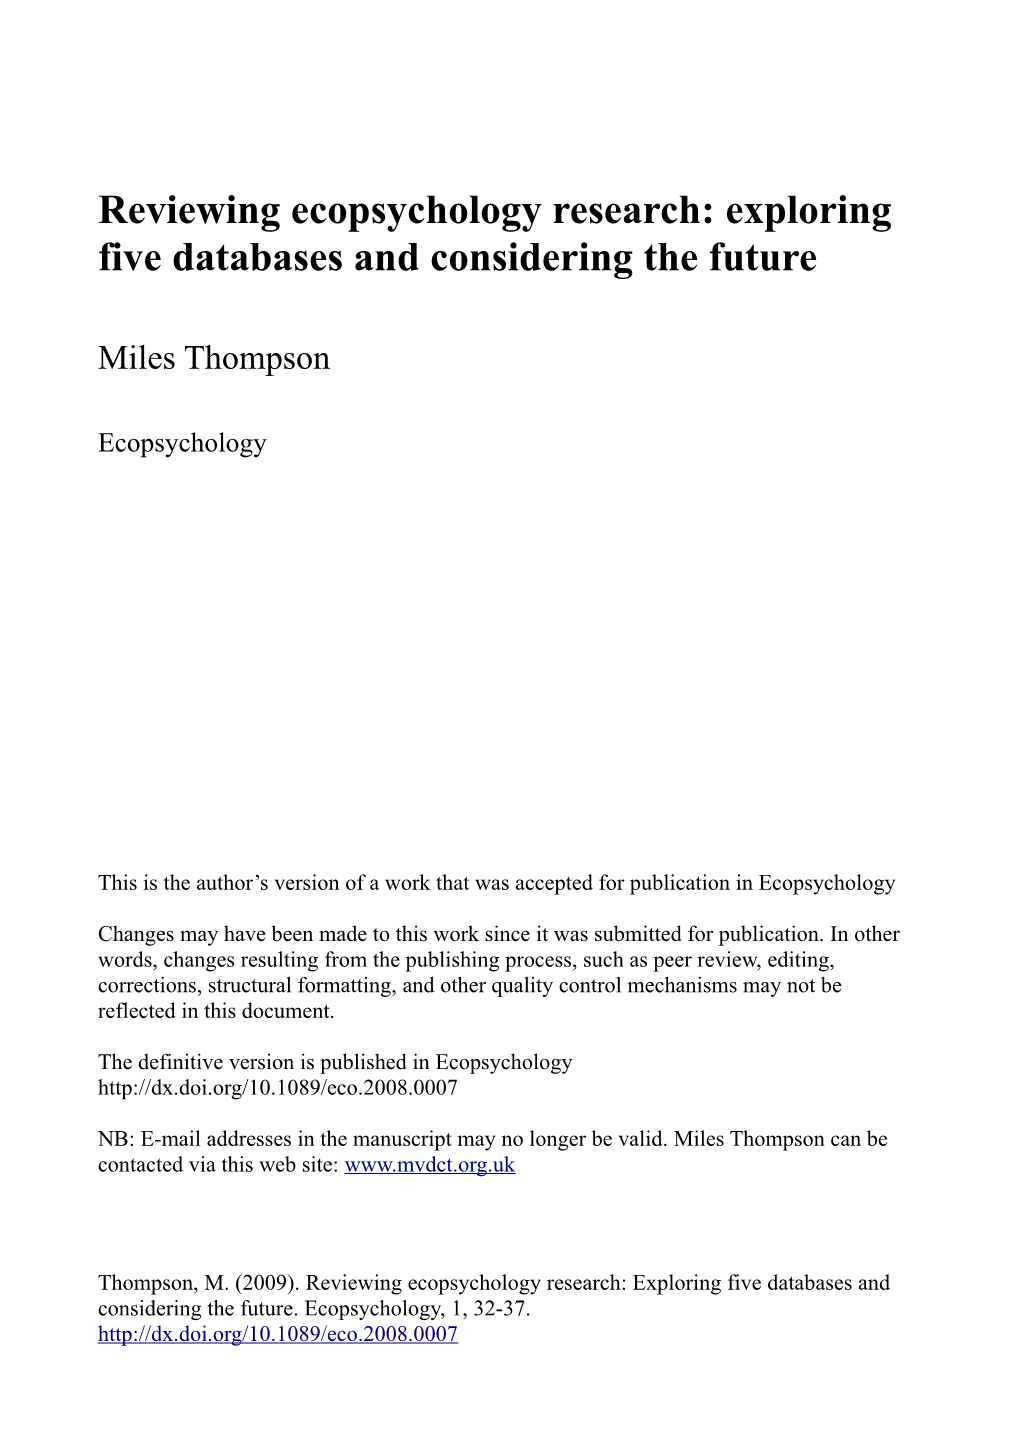 Reviewing Ecopsychology Research: Exploring Five Databases and Considering the Future